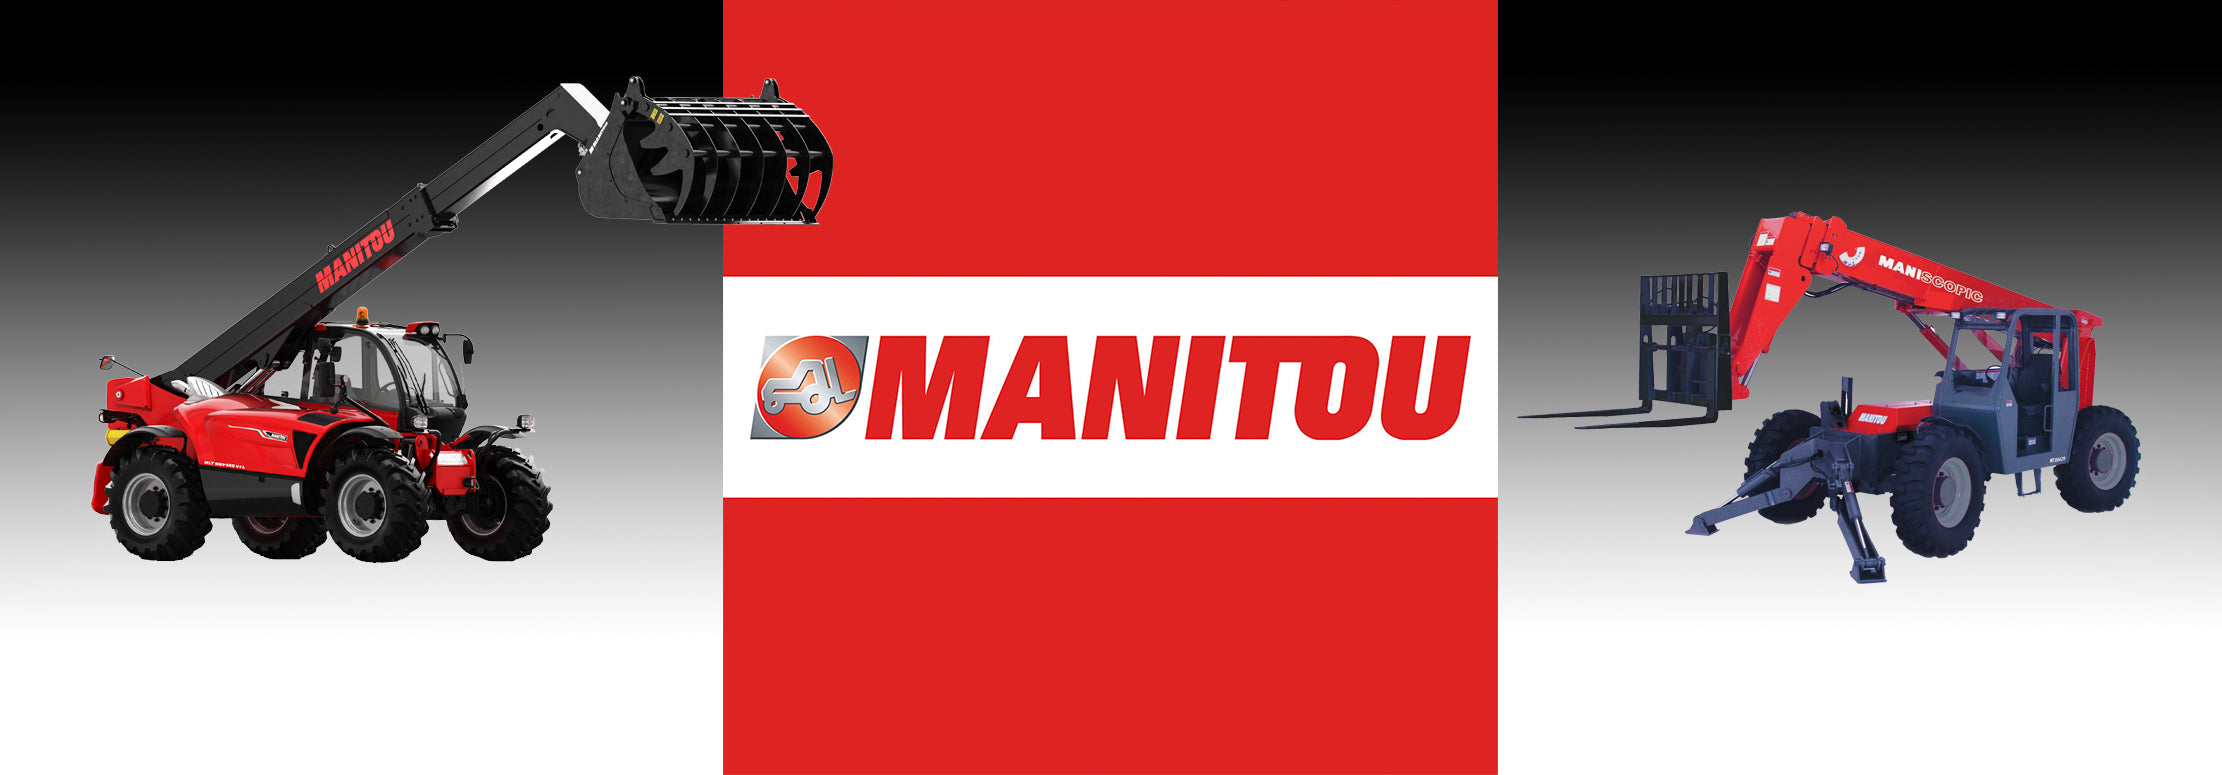 Manitou equipment tire covers tire socks drip diapers surface protection